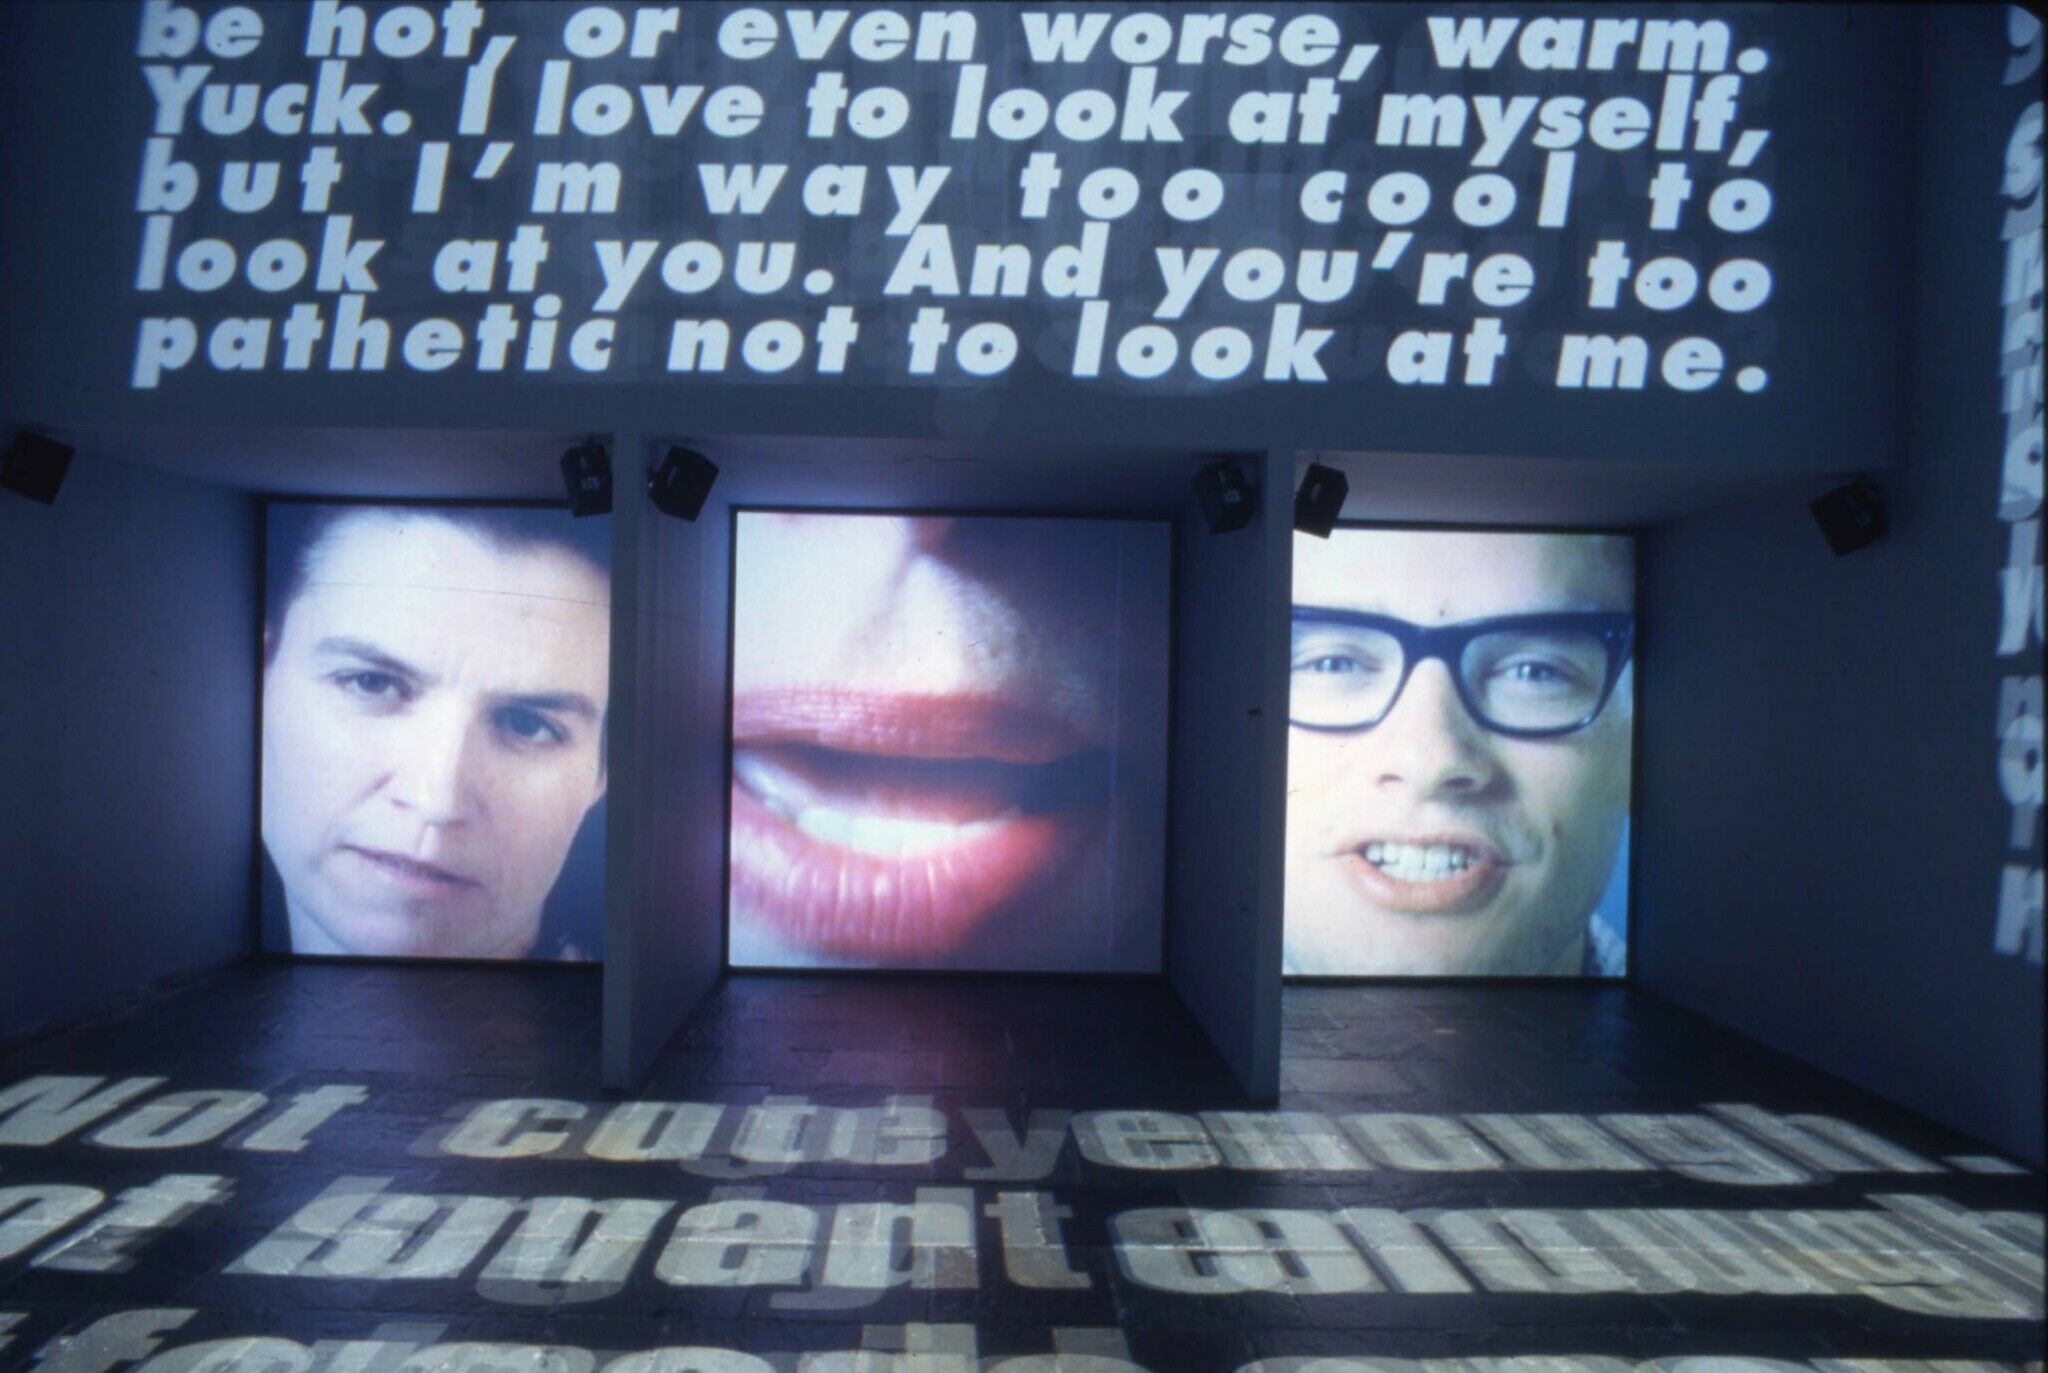 Three screens displaying close up views of a face, along with projections of white text on the walls.